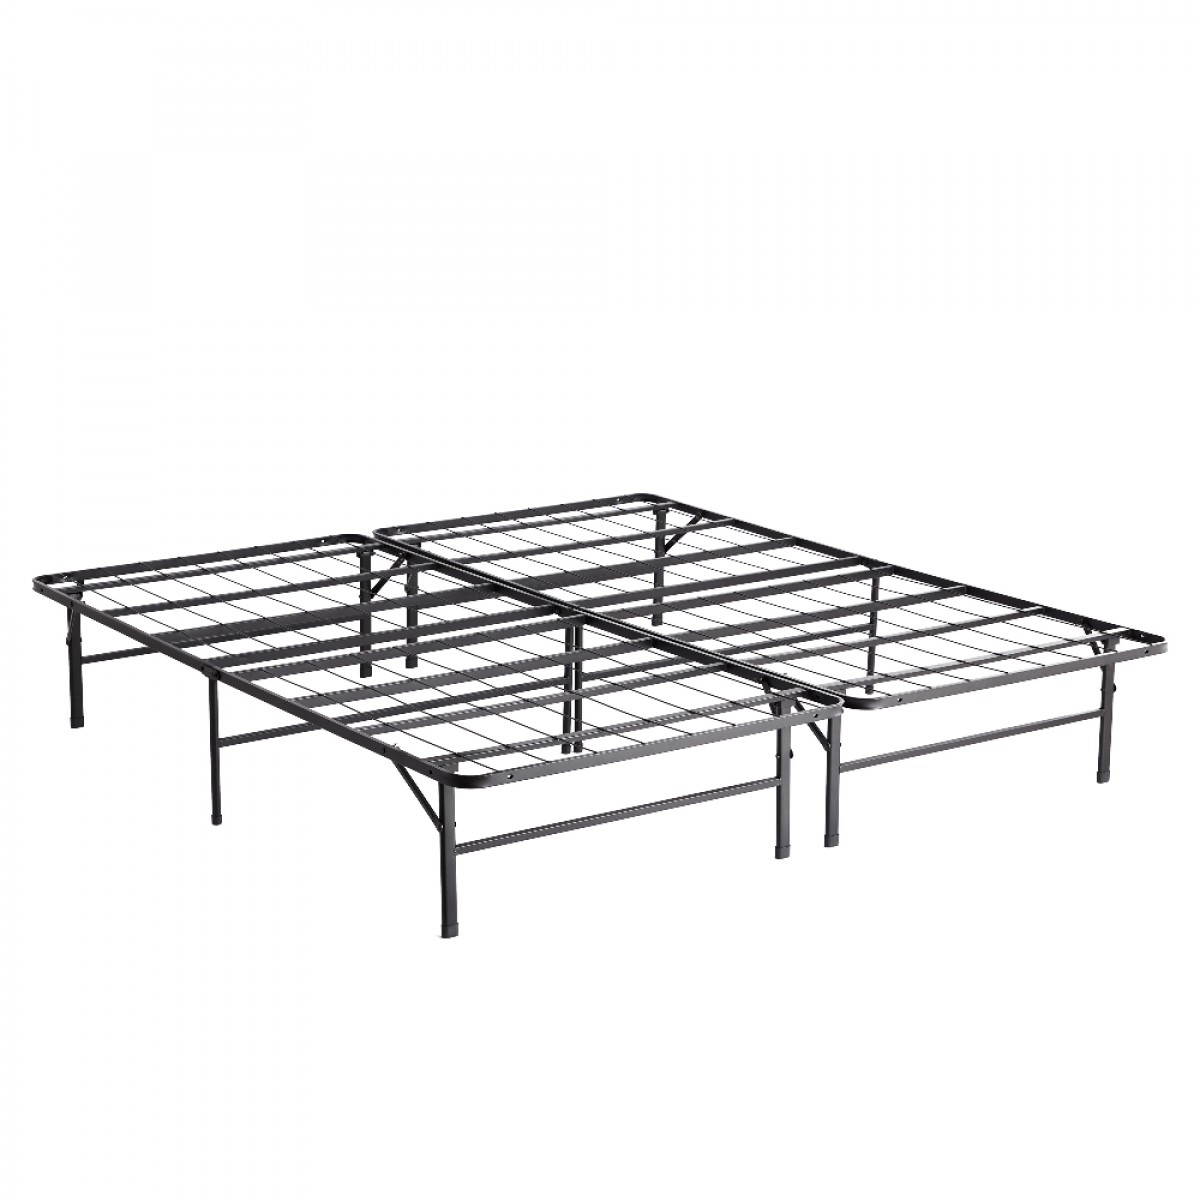 Malouf Highrise Lt Bed Frame, High Rise Queen Bed Frame